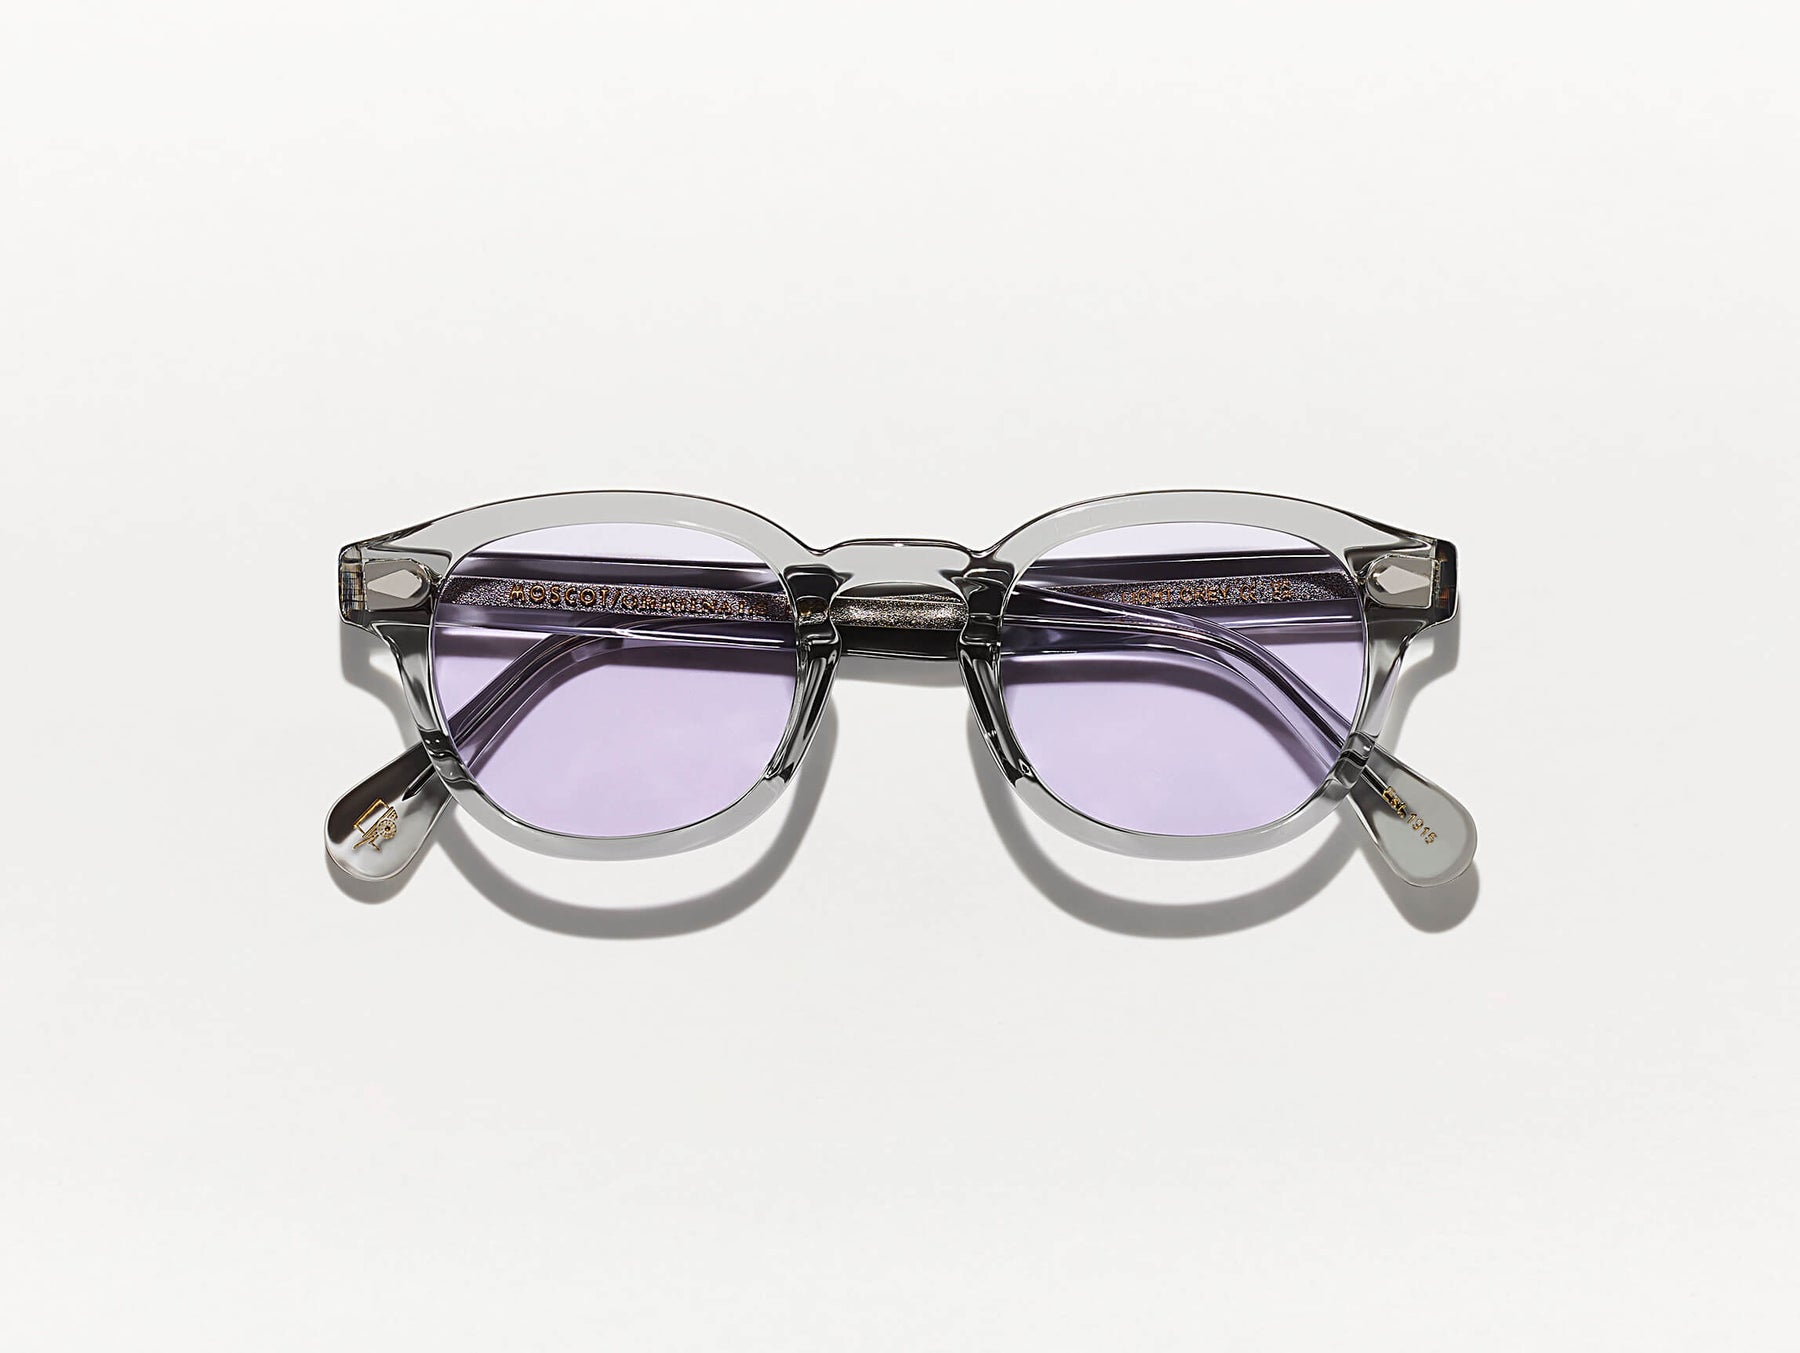 The LEMTOSH Pastel with Lavender Tinted Lenses